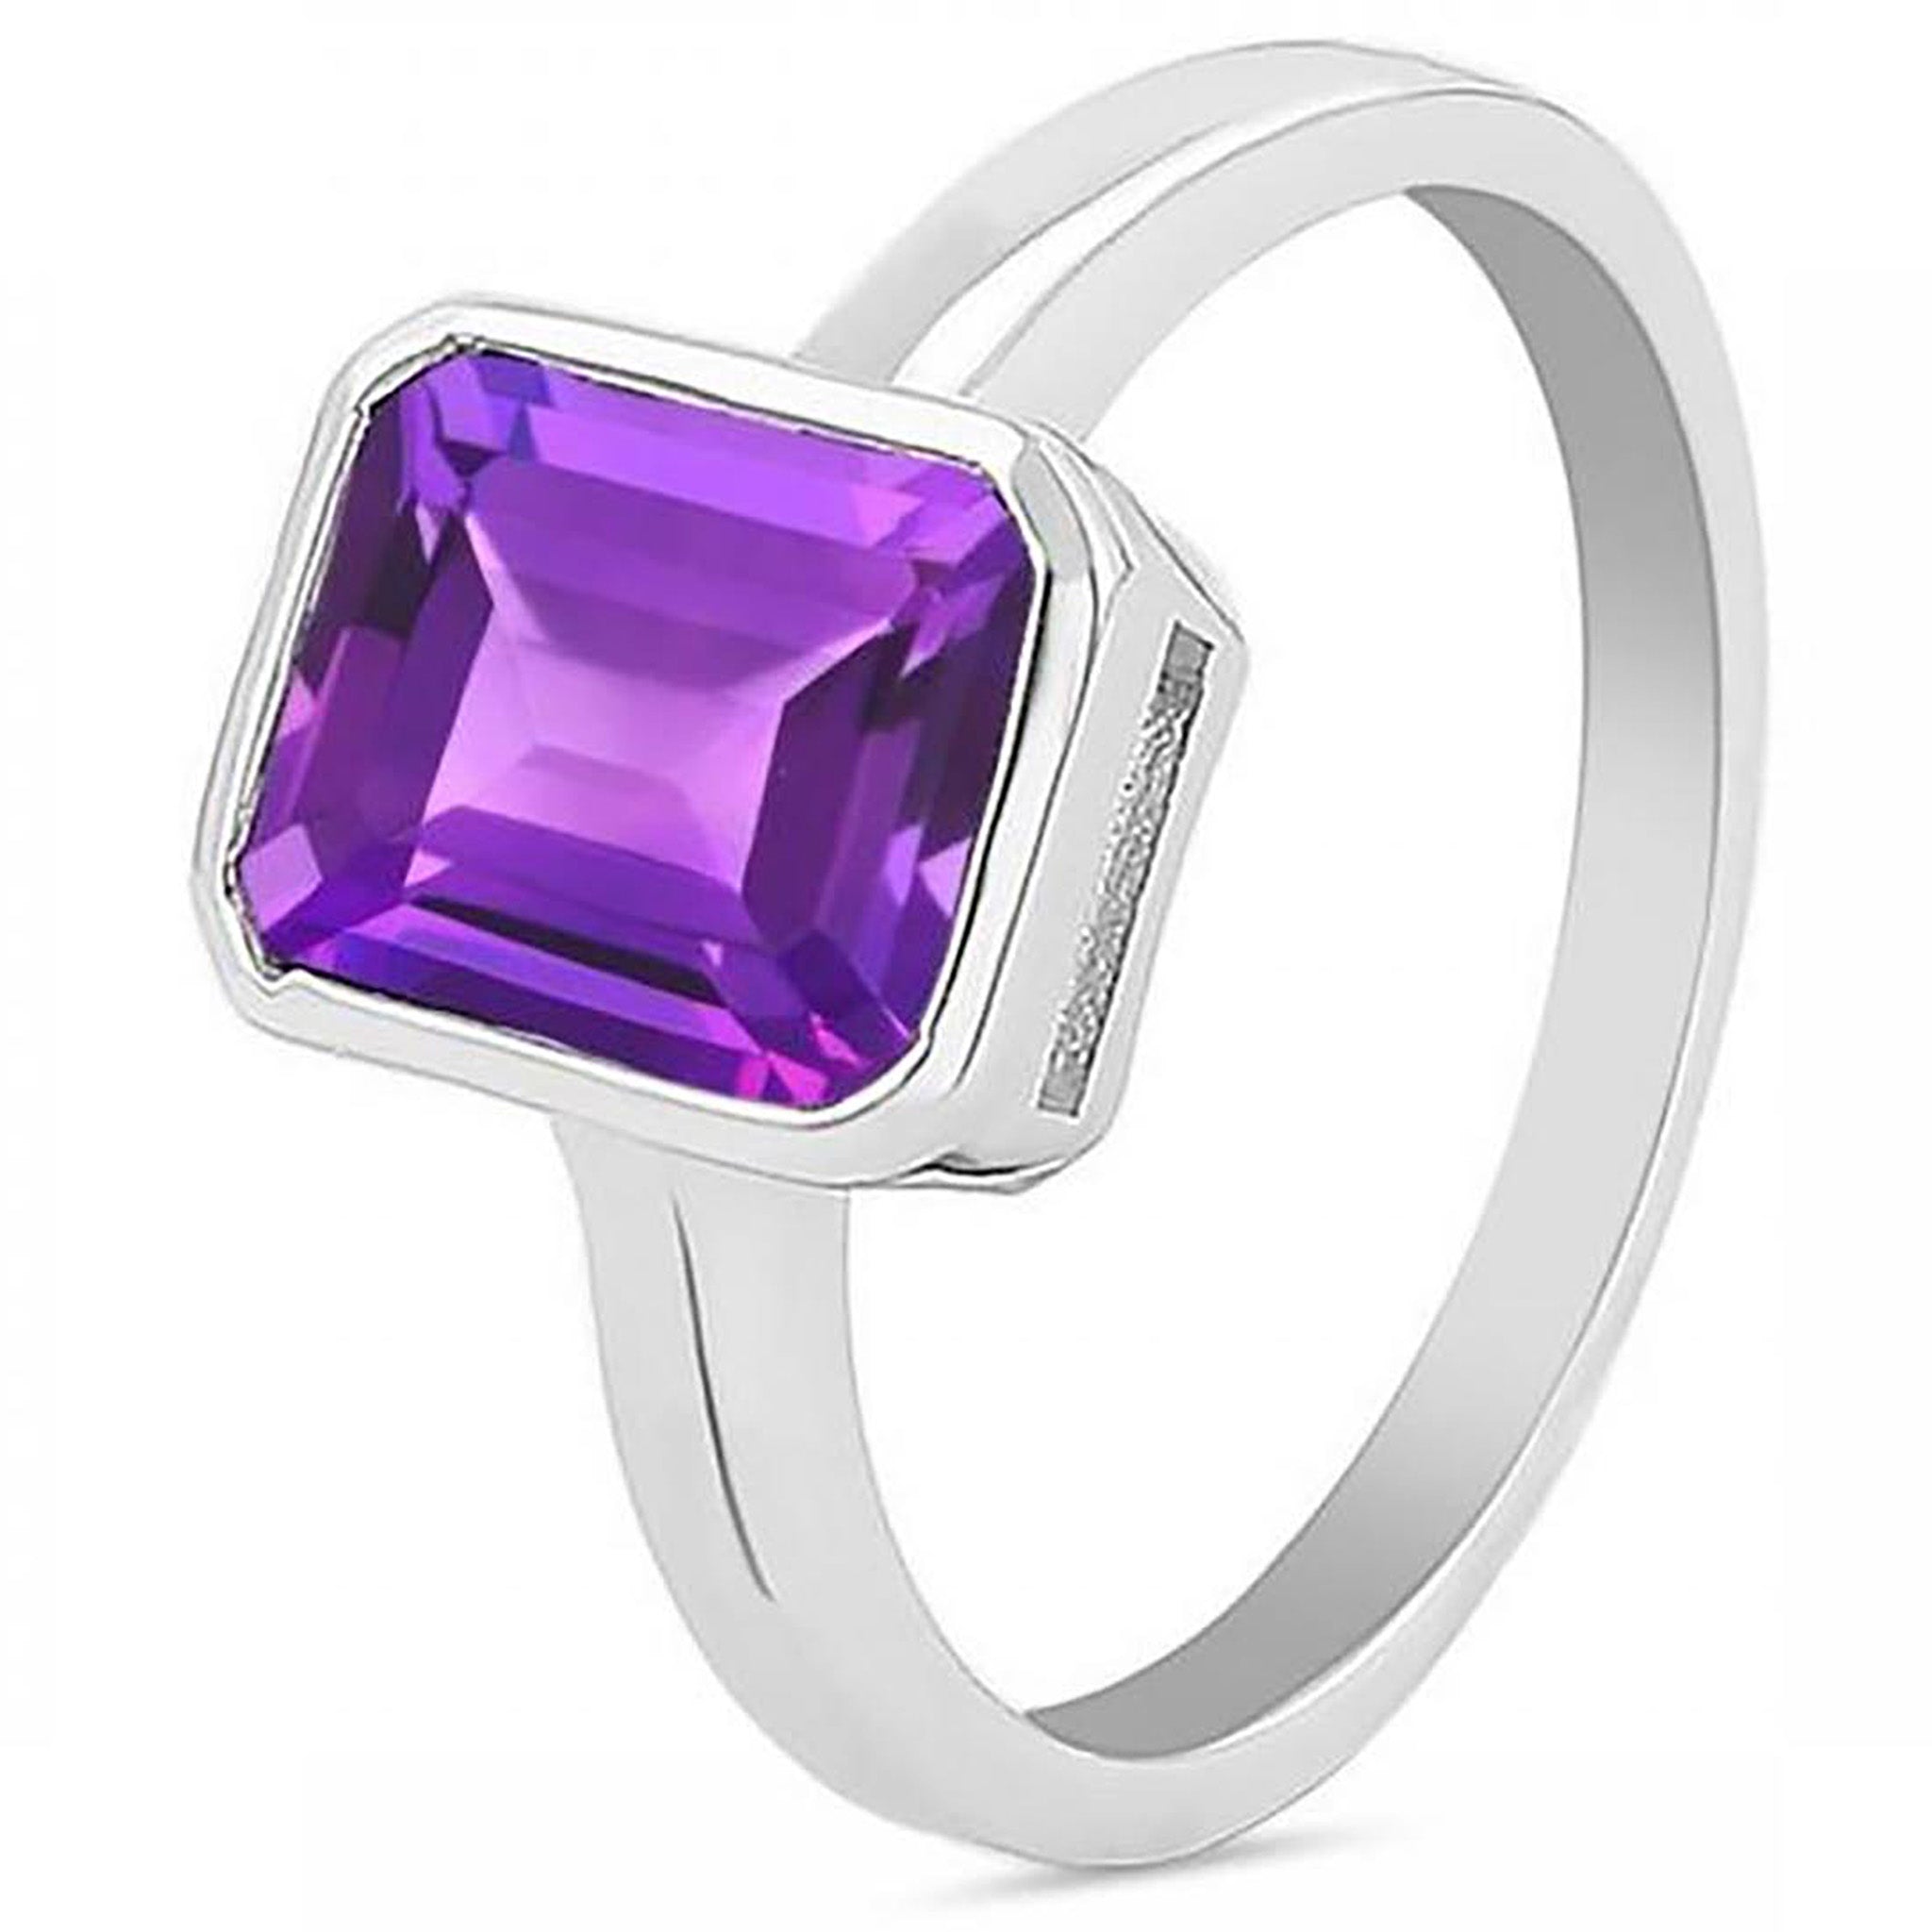 Polished Faceted Amethyst Ring